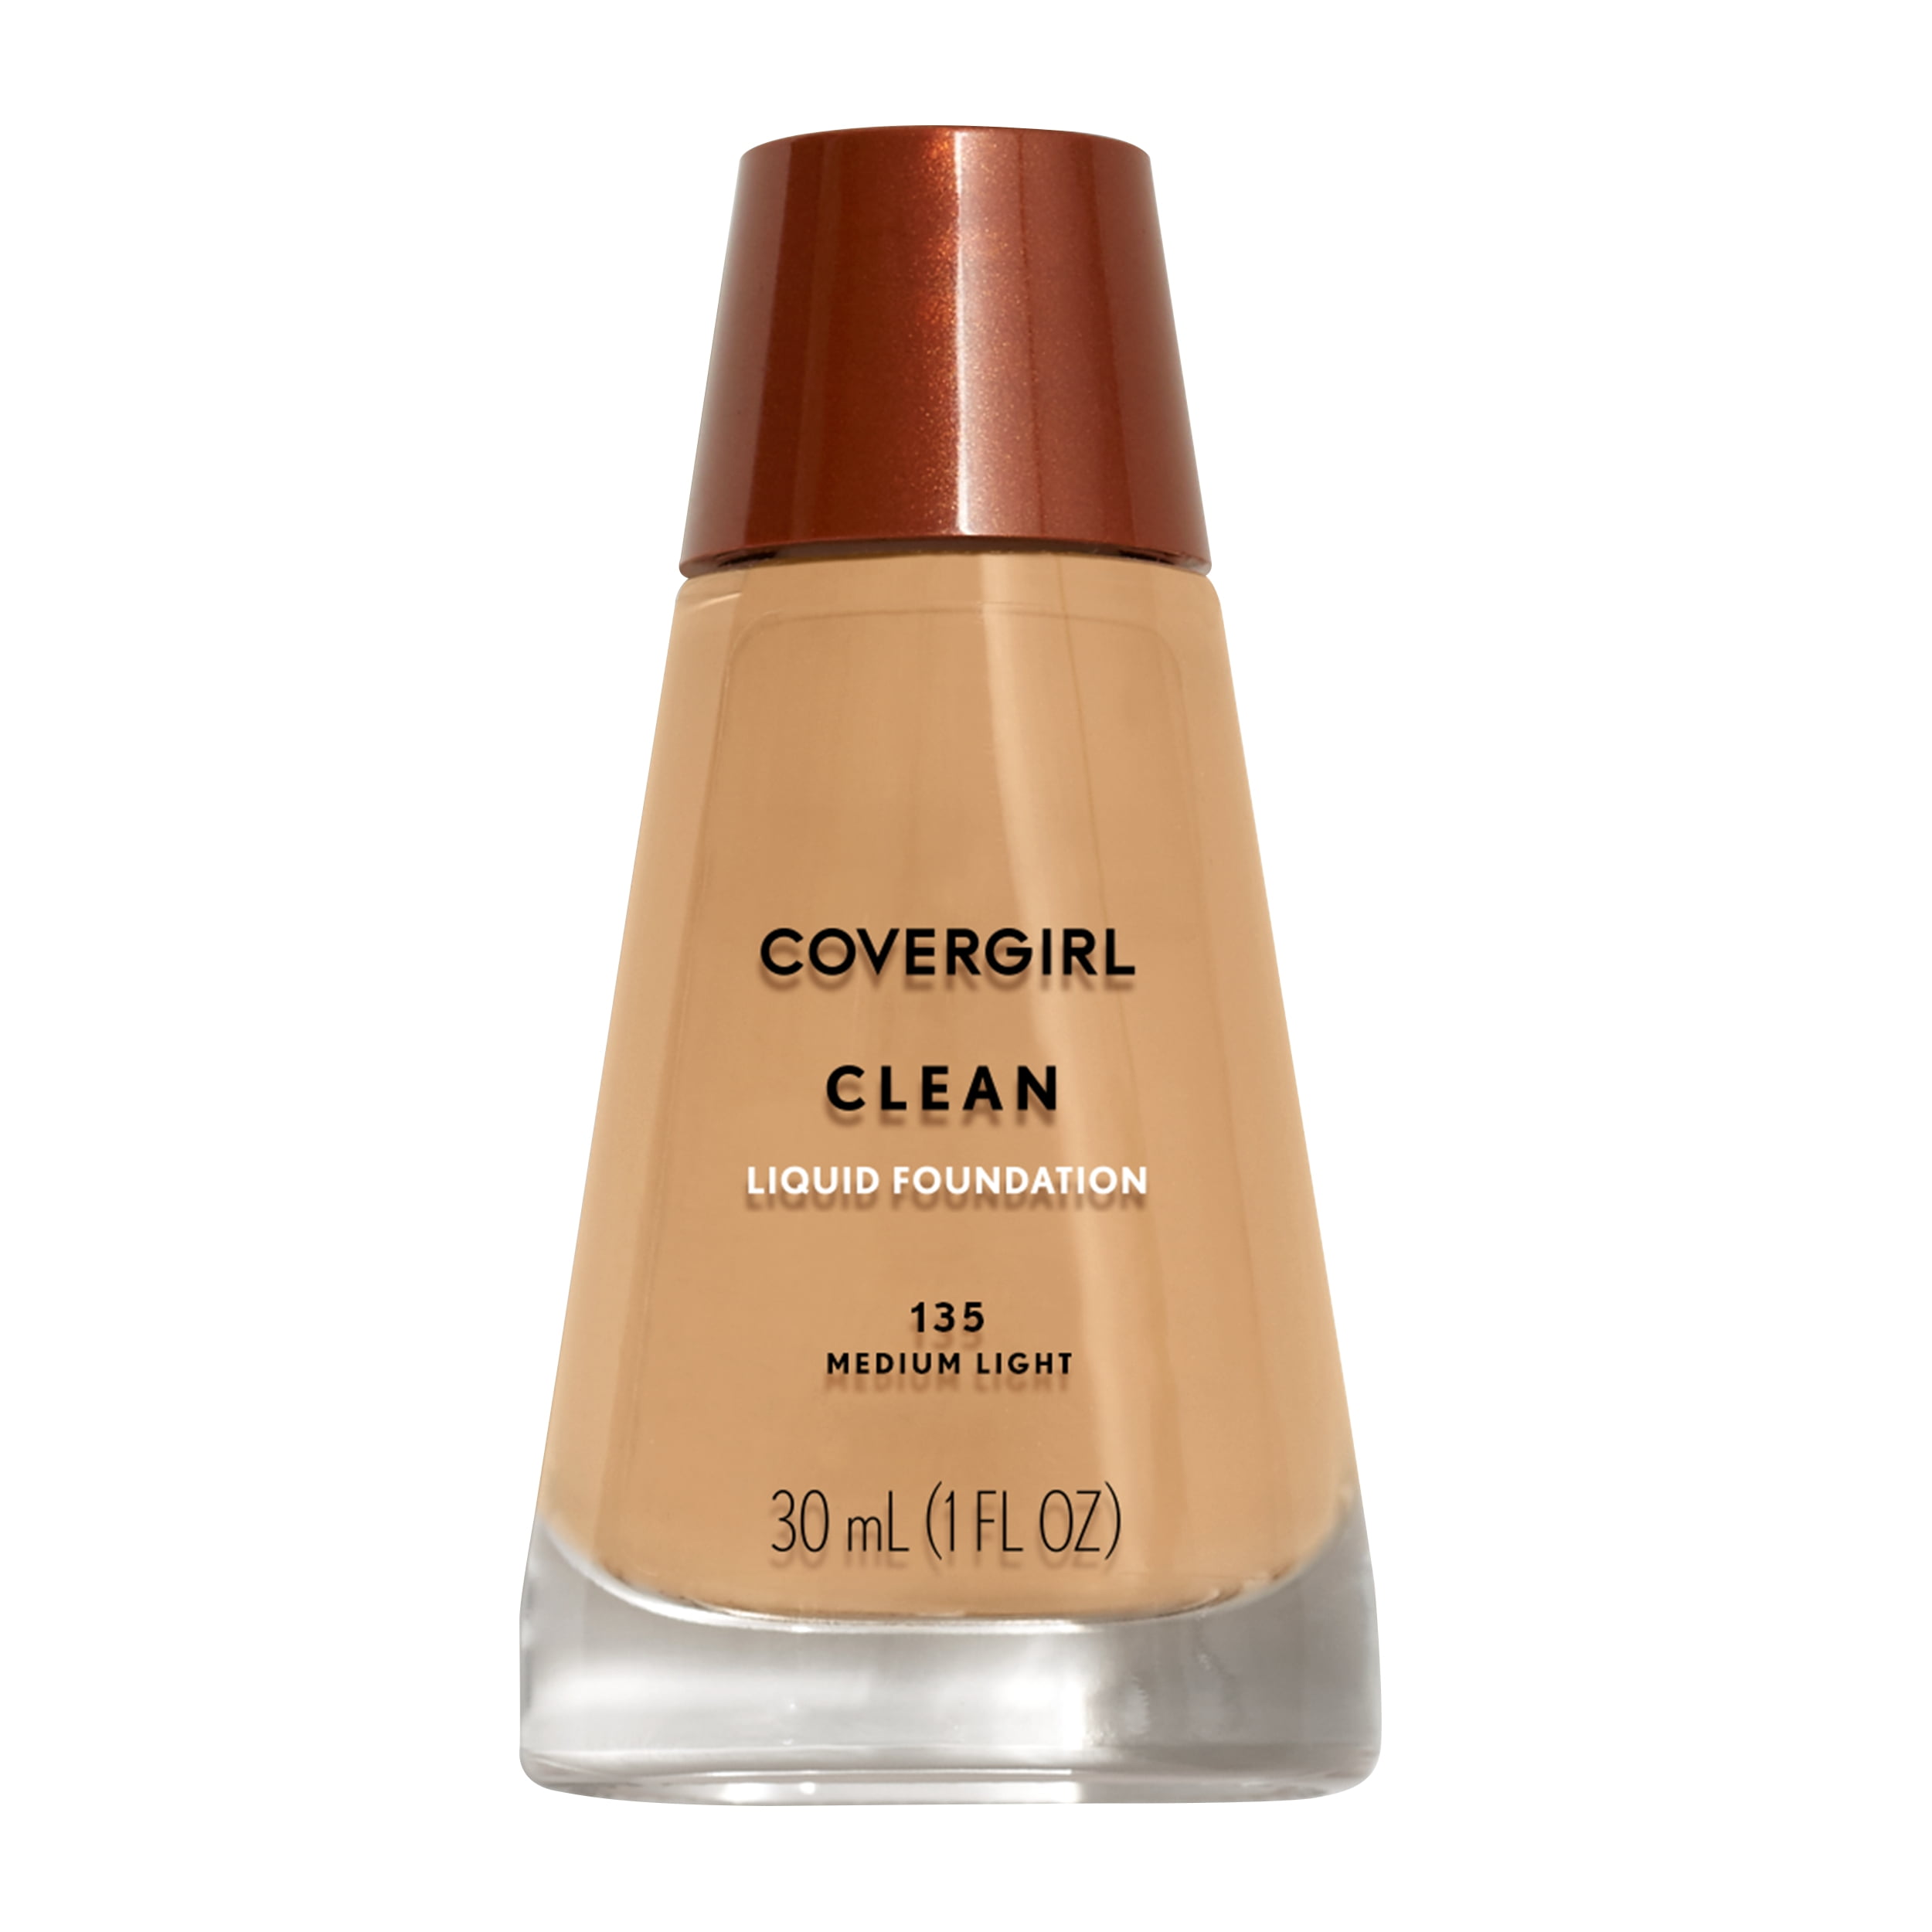 Cover-Expert Full Coverage Liquid Foundation SPF 15 - 2 Neutral Beige by By  Terry for Women - 1.18 oz Foundation